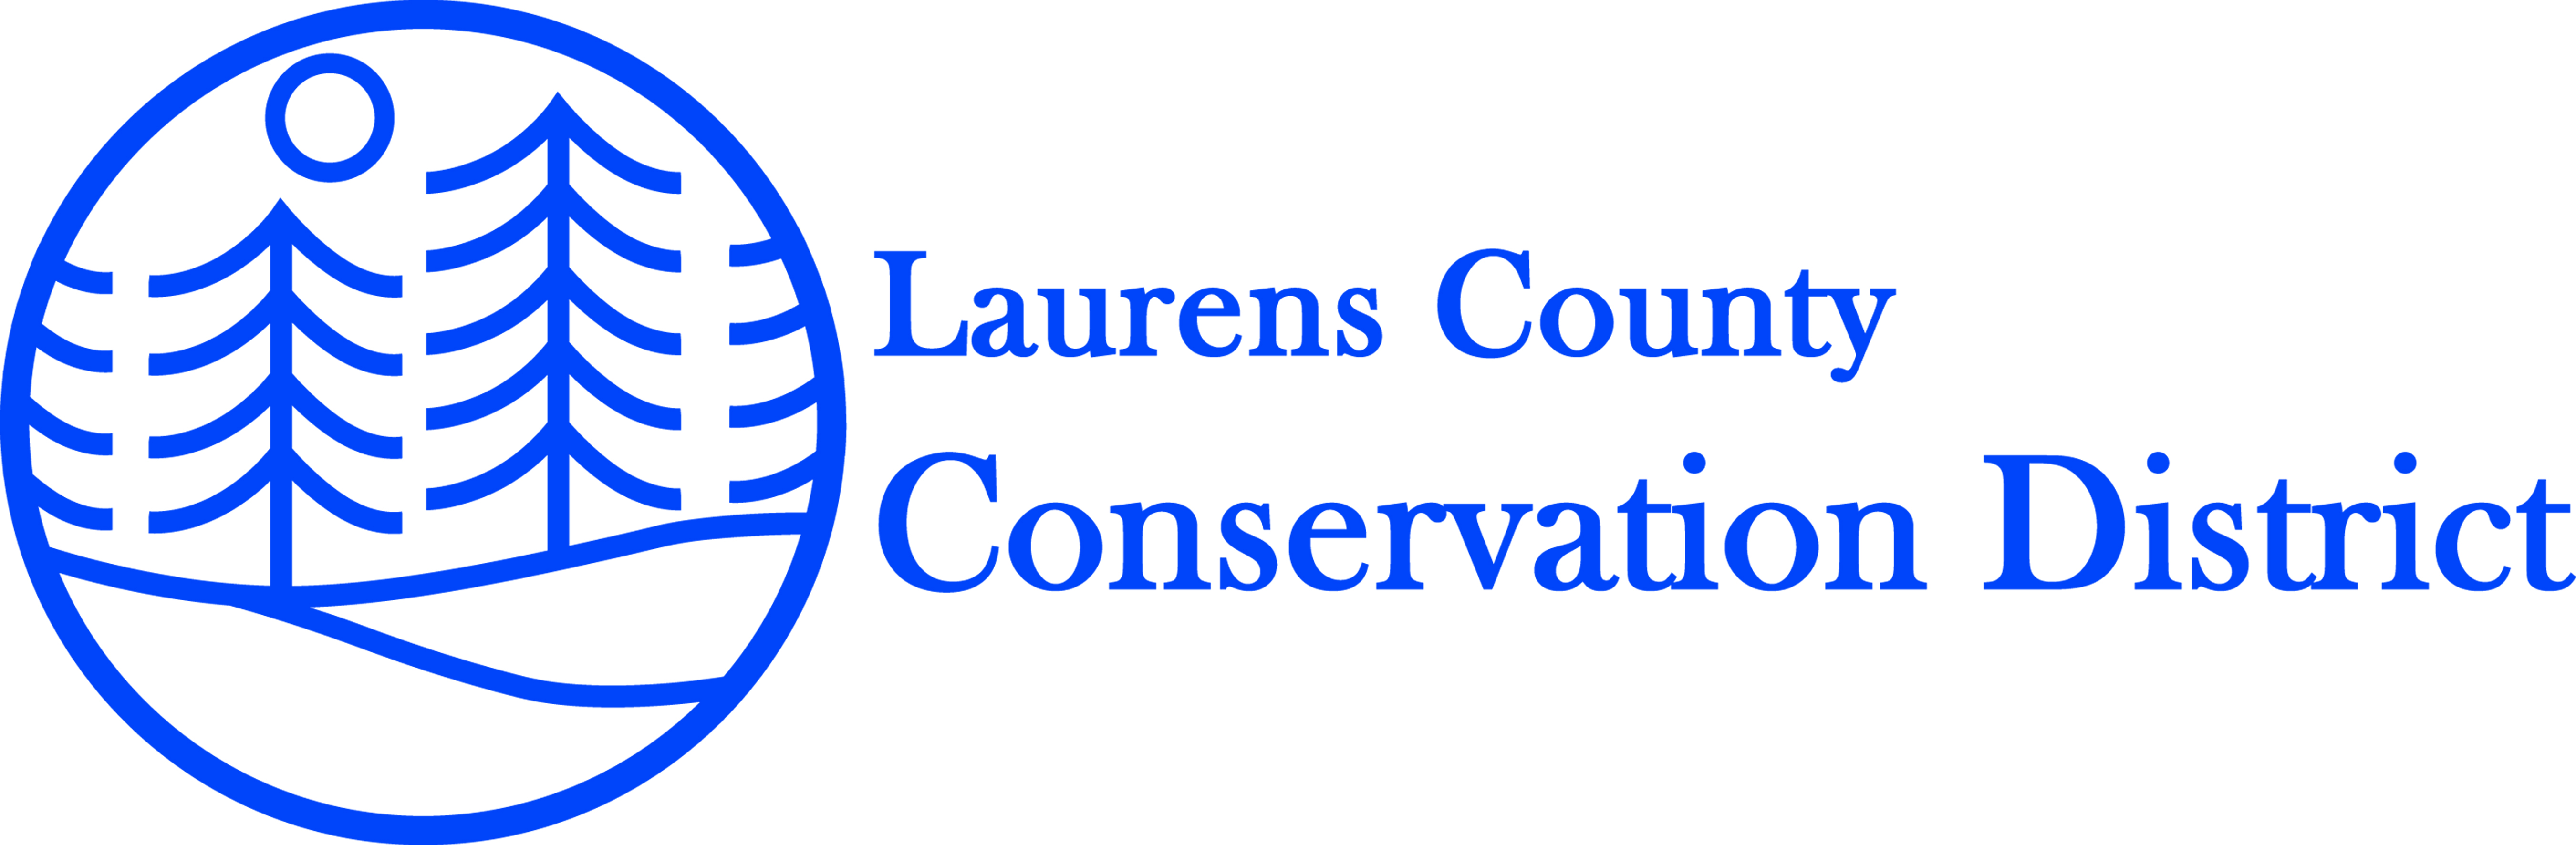 Laurens County Soil & Water Conservation District